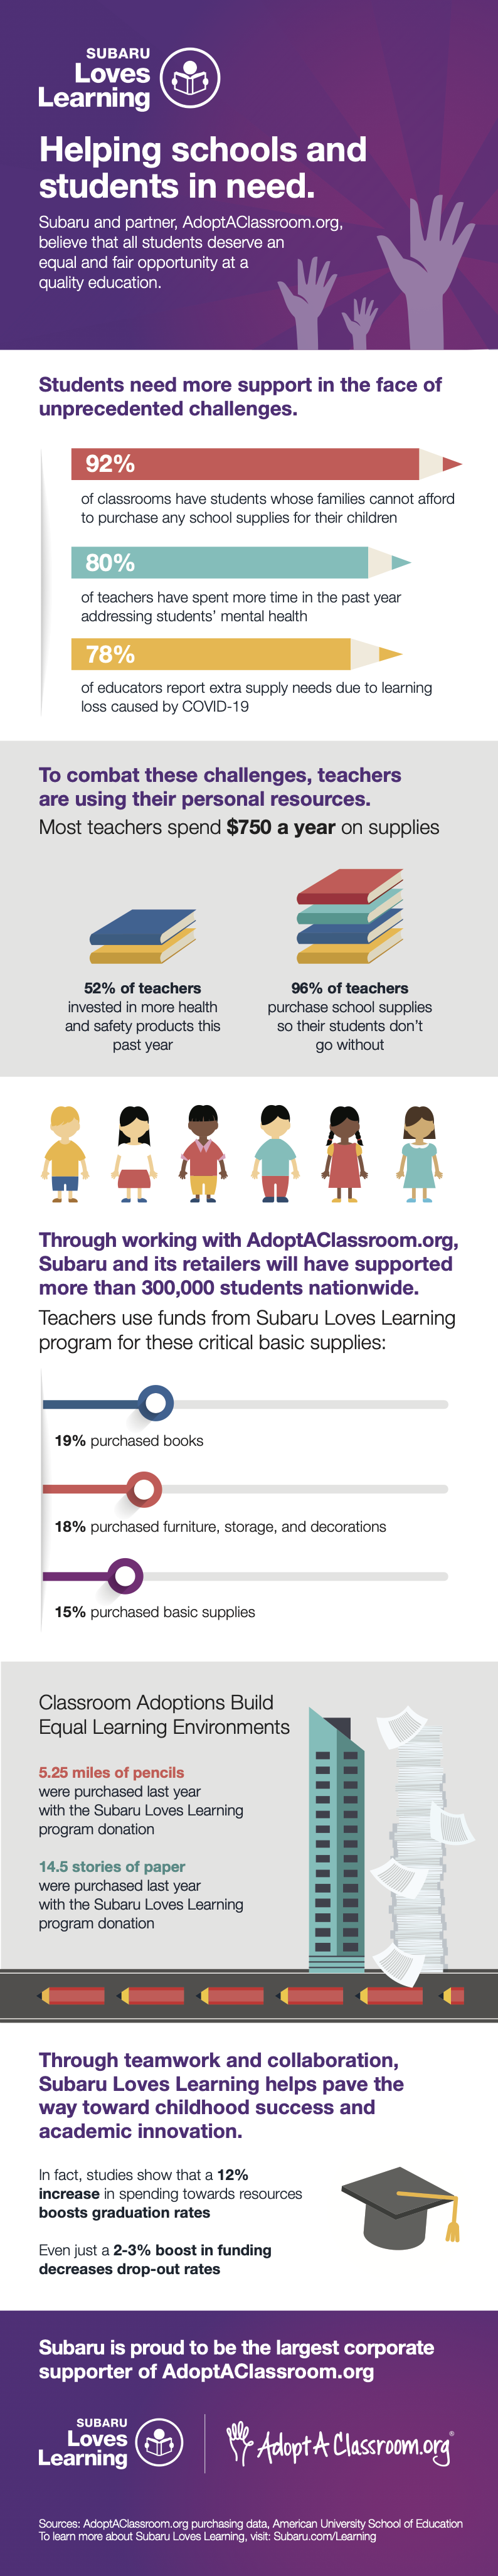 Infographic: Helping schools and students in need